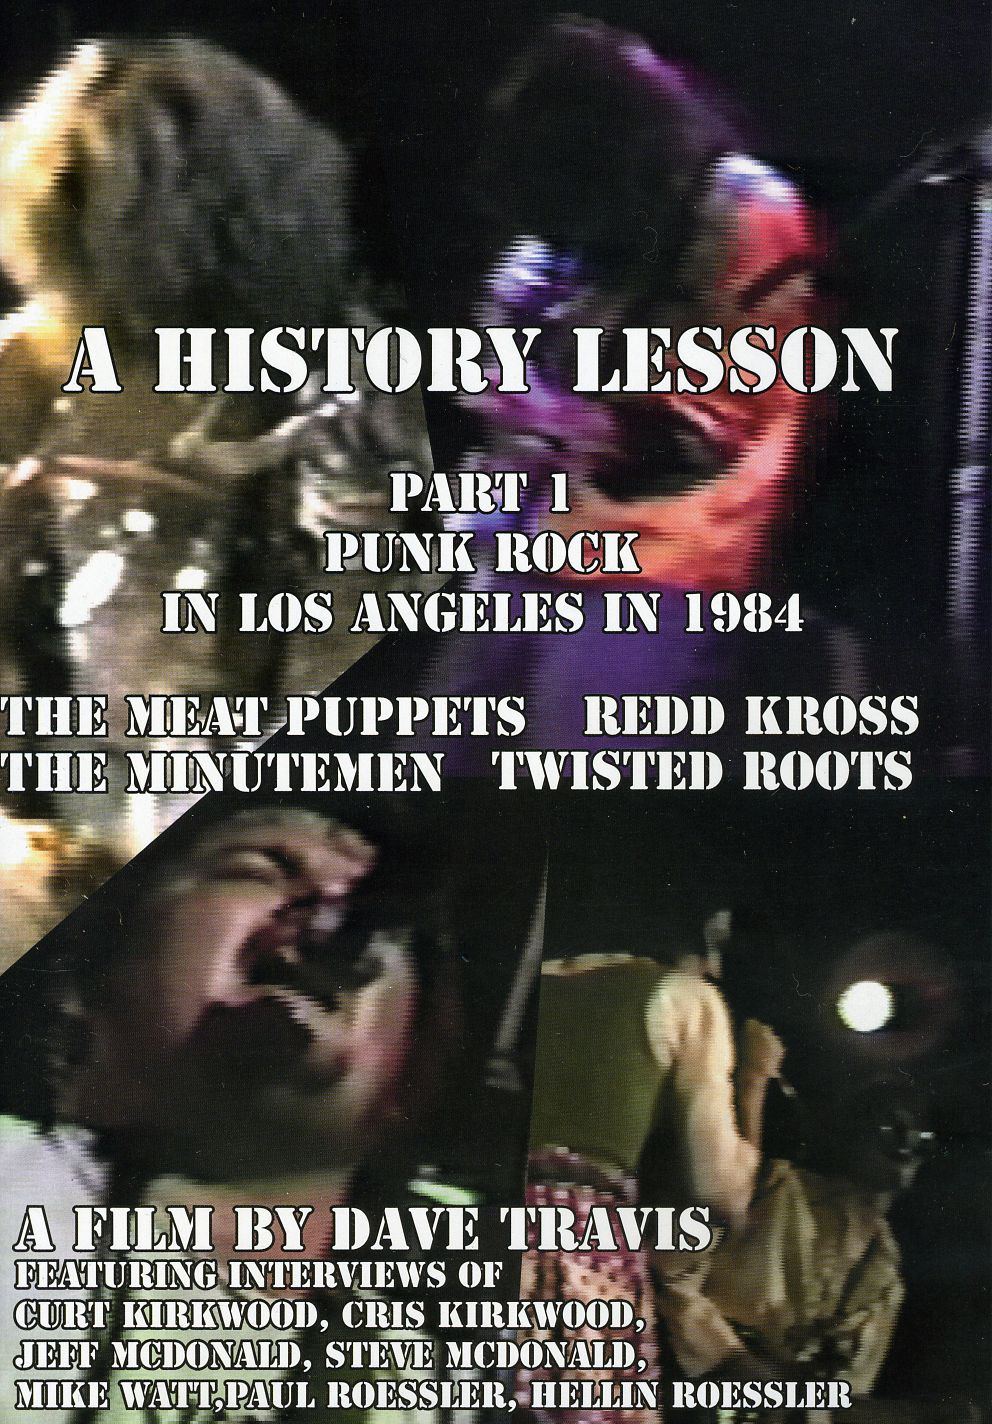 HISTORY LESSON 1: PUNK ROCK IN LOS ANGELES IN 1984